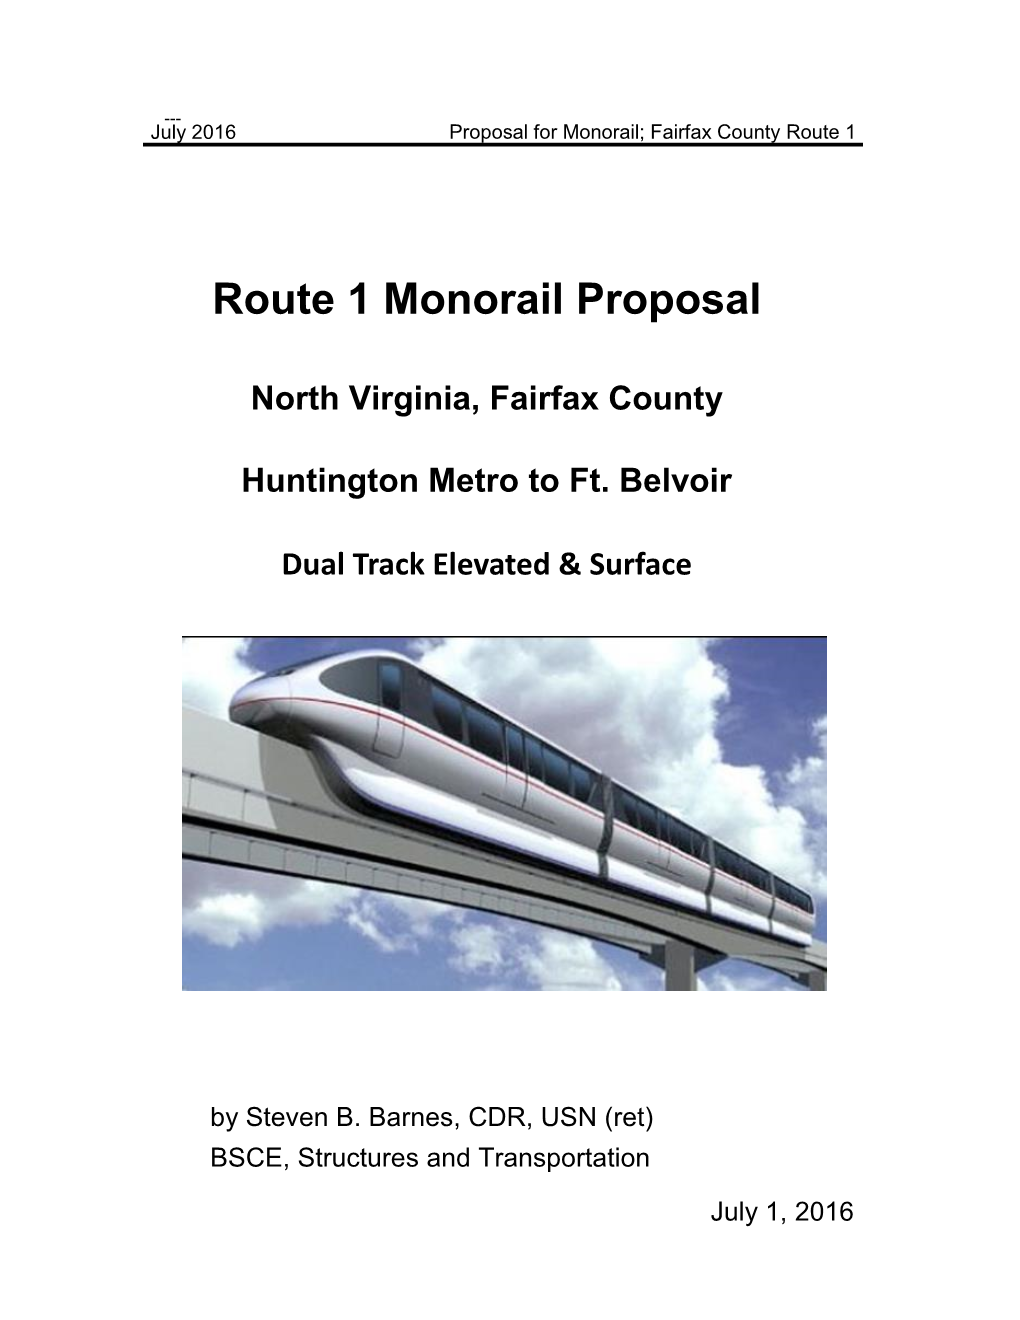 Route 1 Monorail Proposal